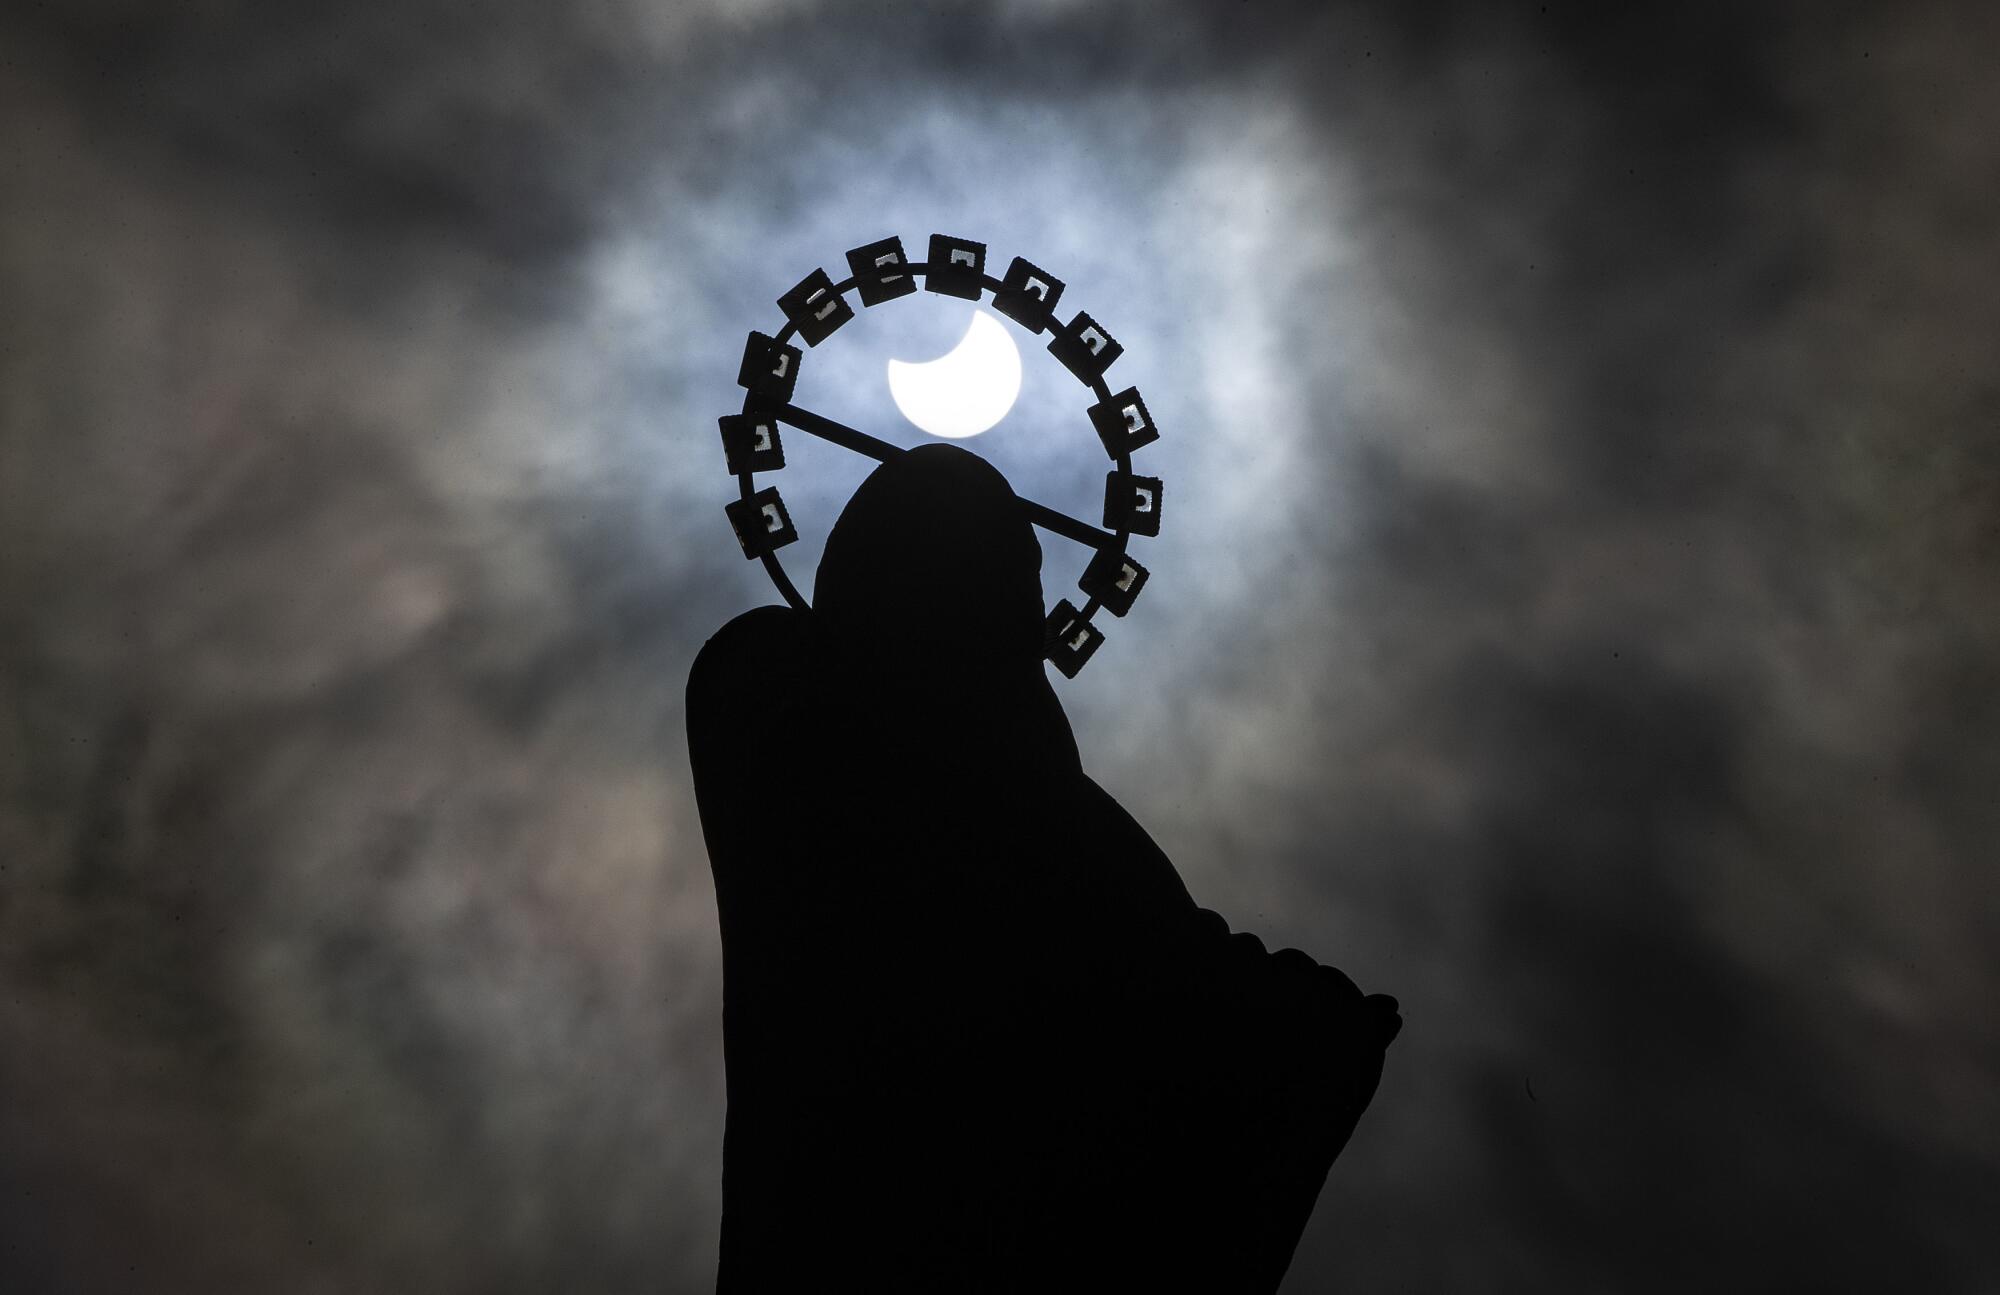 A statue of Our Lady, Star of the Sea on Bull Wall in Dublin, is silhouetted against the sky during partial eclipse.